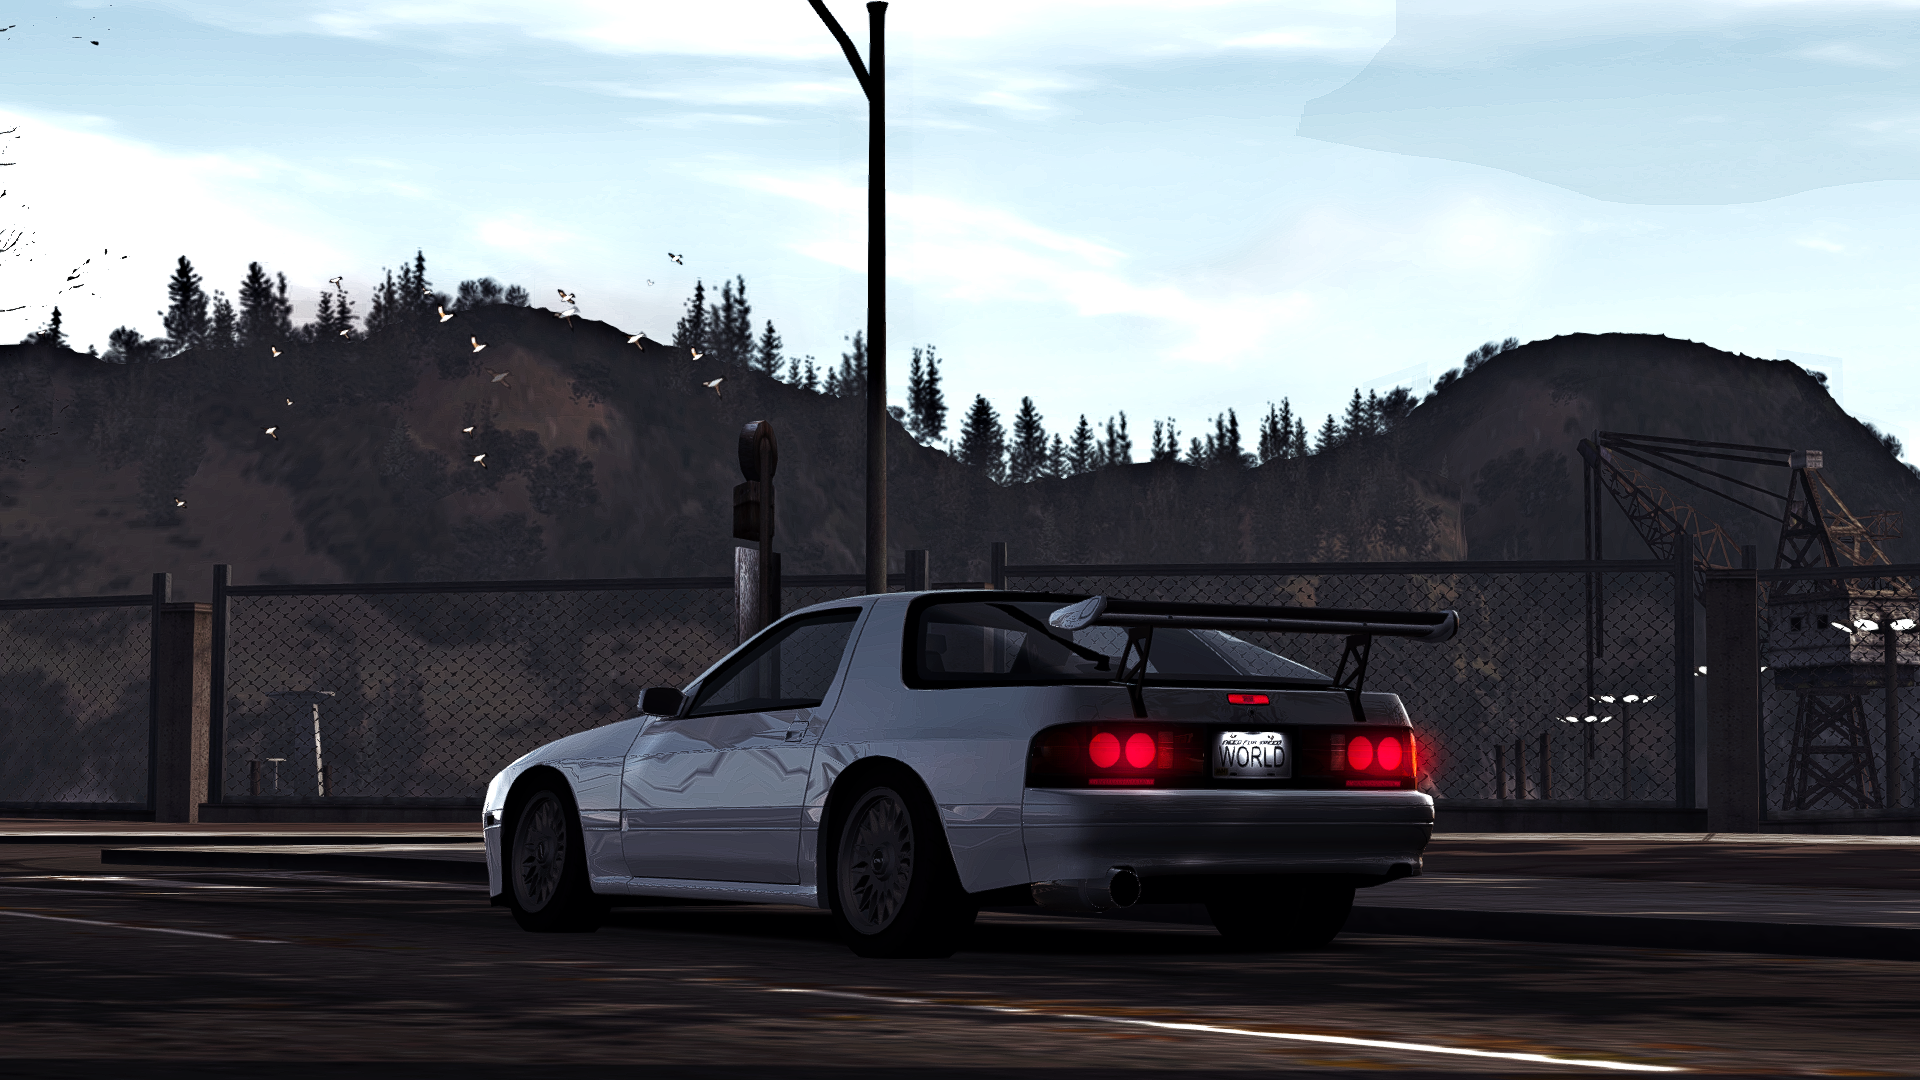 General 1920x1080 Mazda RX-7 video games Need for Speed: World vehicle car